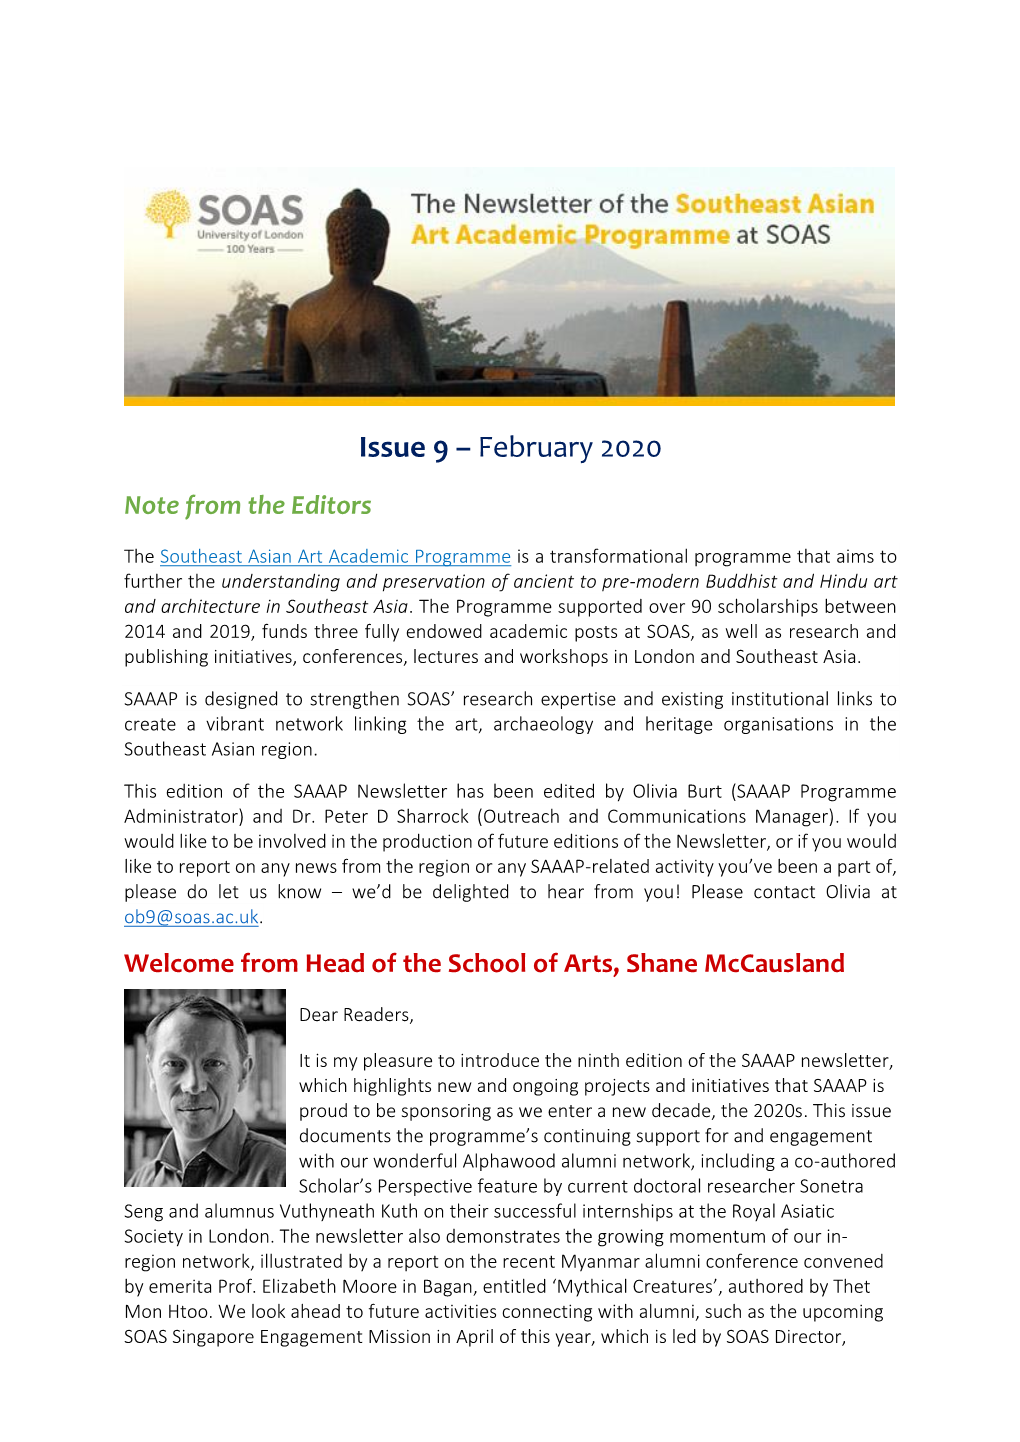 SAAAP Newsletter Has Been Edited by Olivia Burt (SAAAP Programme Administrator) and Dr